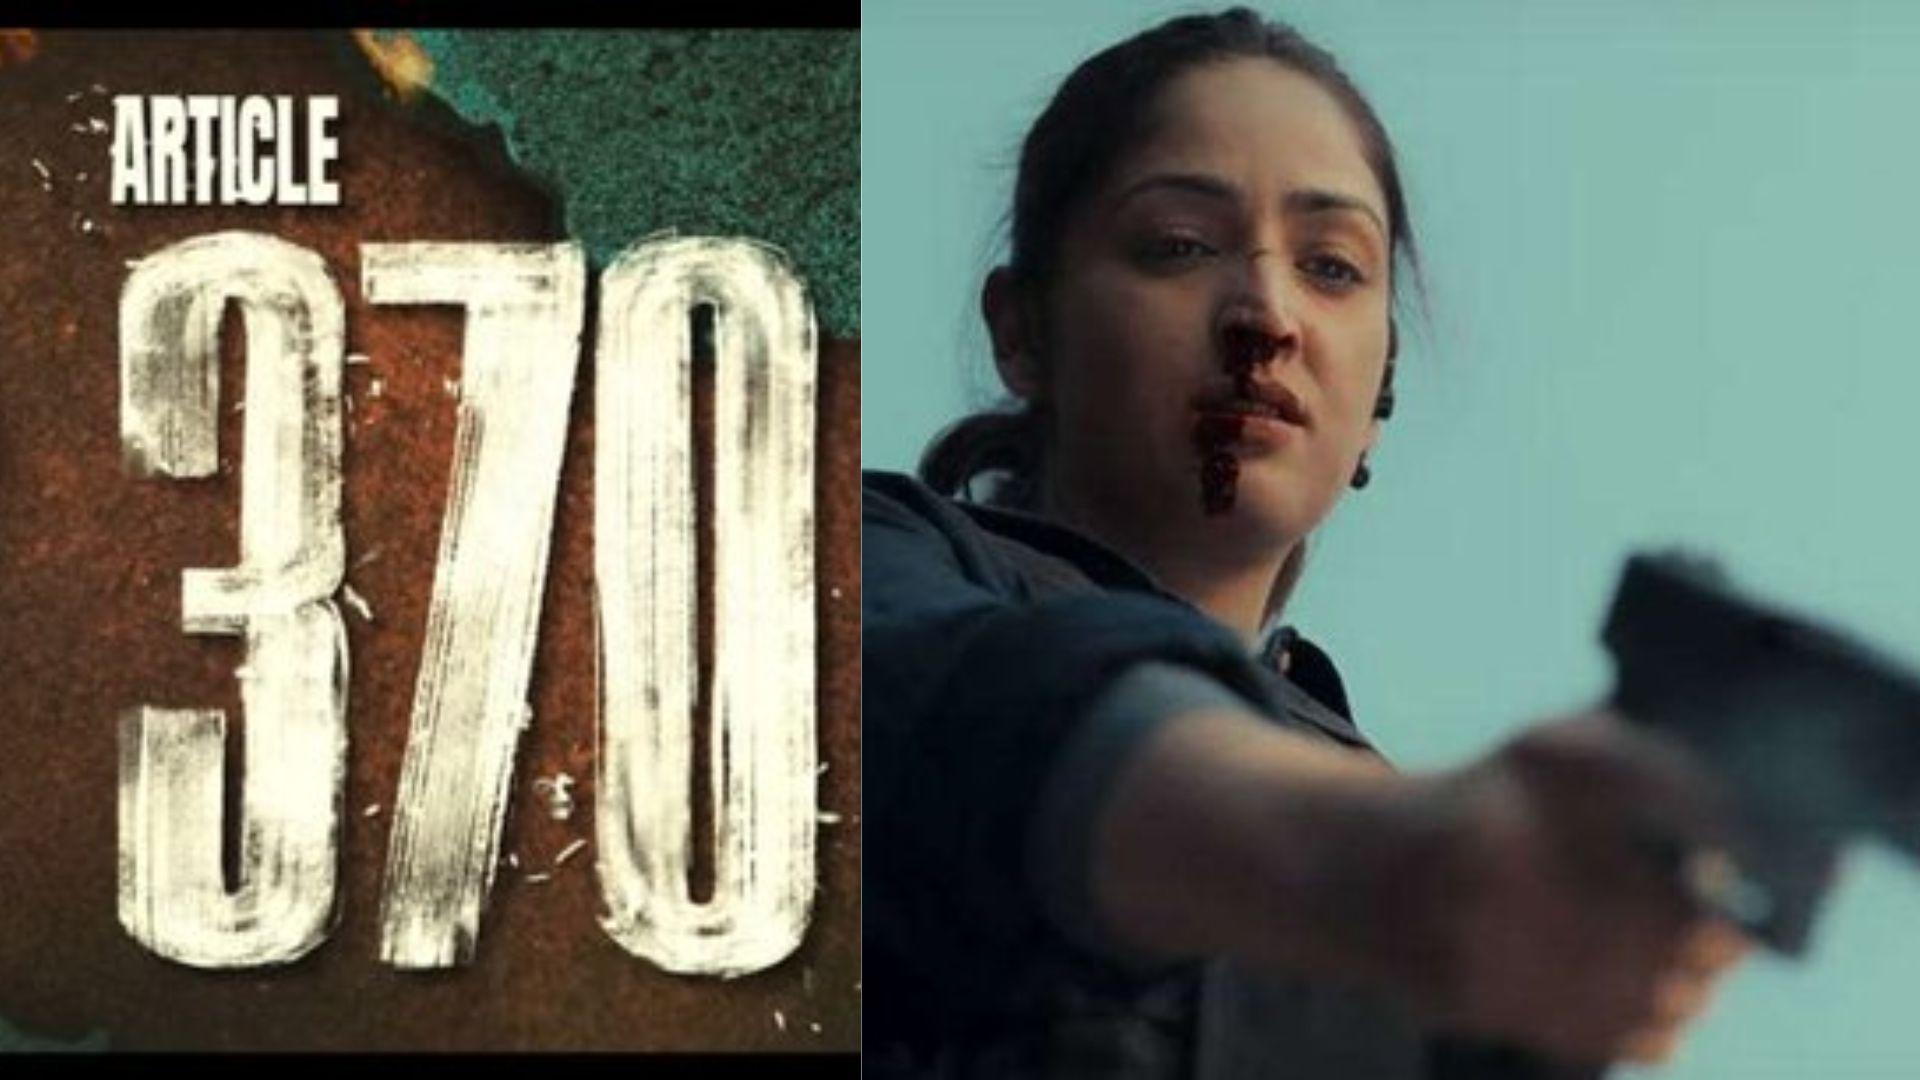 ‘Article 370’ starring Yami Gautam receives recognition by PM Modi expresses her gratitude